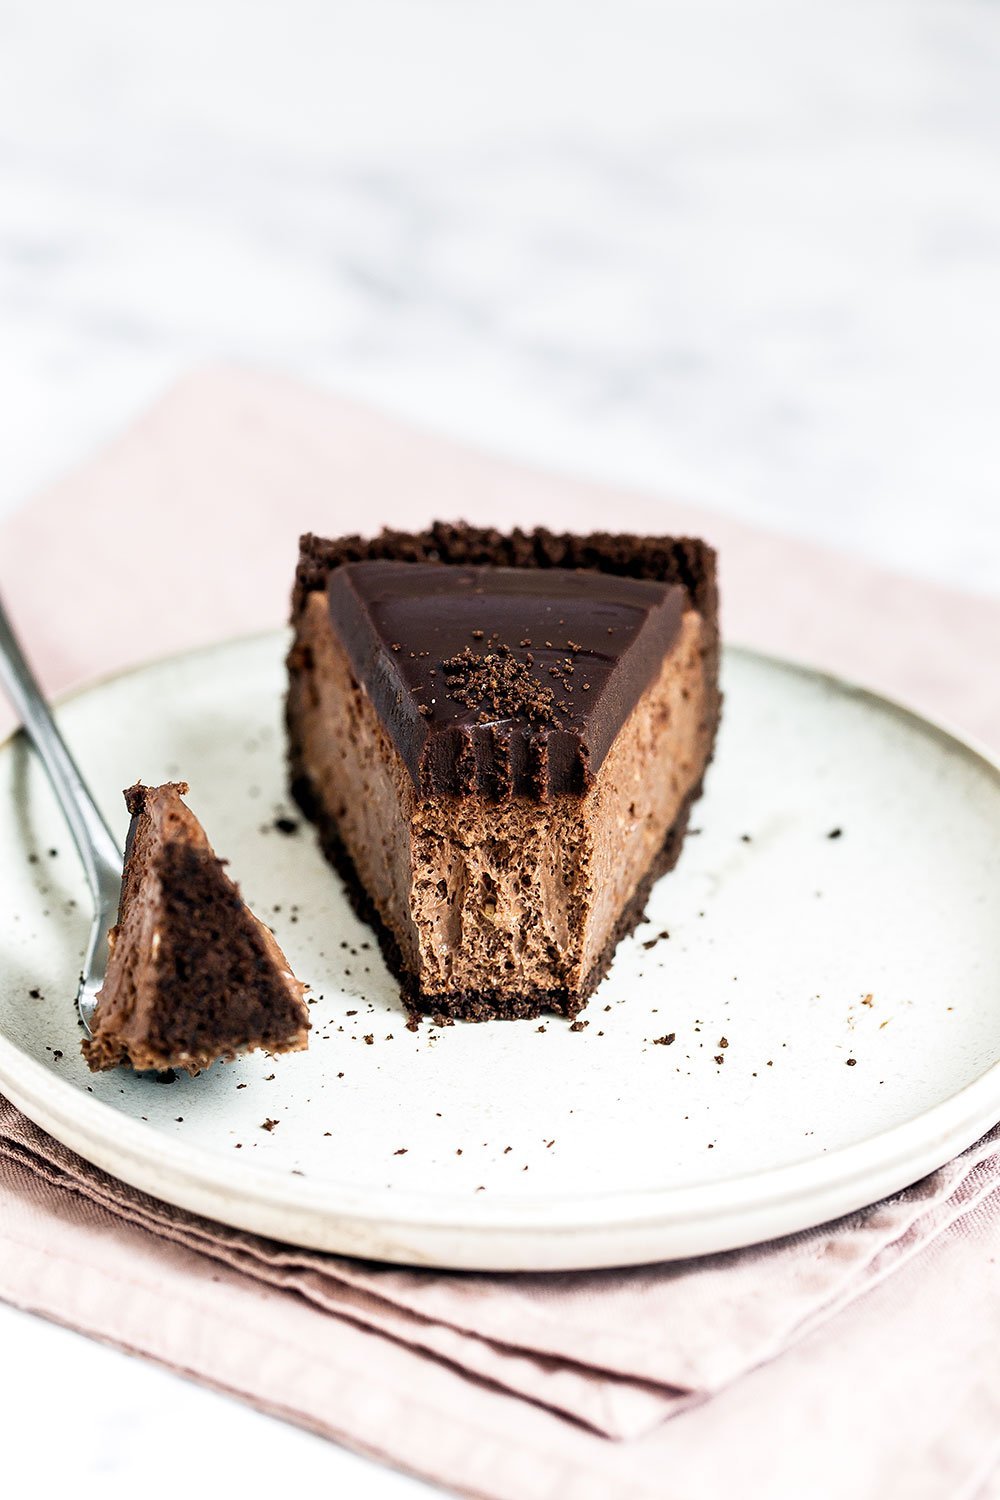 Insanely decadent Death by Chocolate Cheesecake features chocolate in FOUR forms: chocolate cookie crust, double chocolate cheesecake filling, with a chocolate ganache topping. It doesn't get better than this!